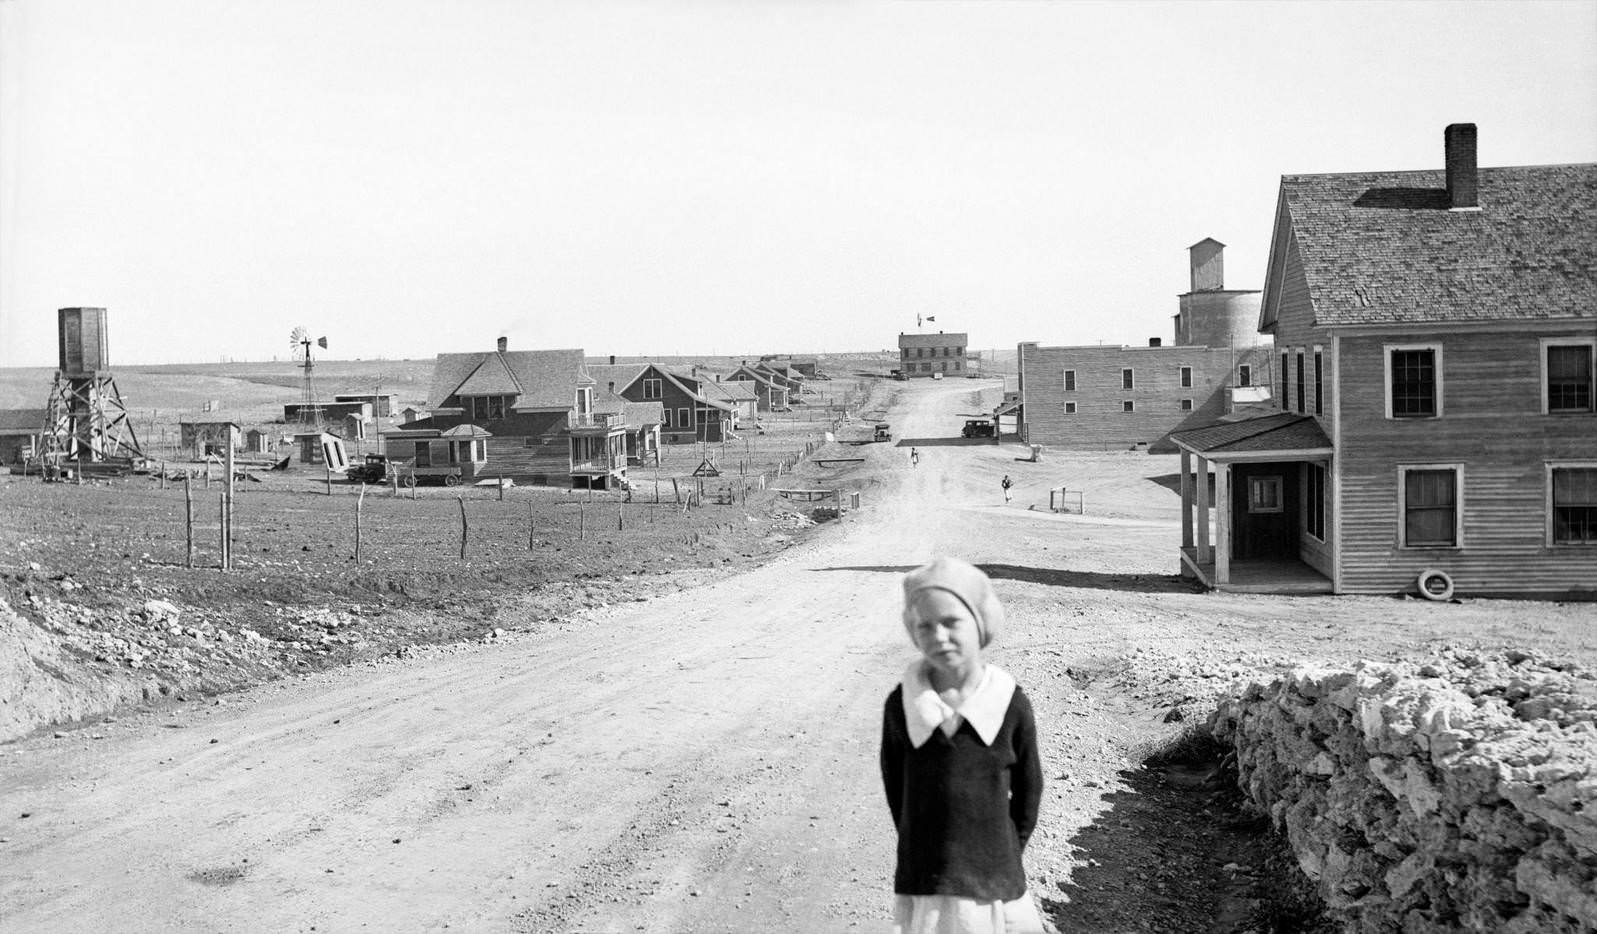 Portrait of Young Girl, Street Scene with Abandoned Grain Mill and Bank both right in Background, Mills, New Mexico, 1930s